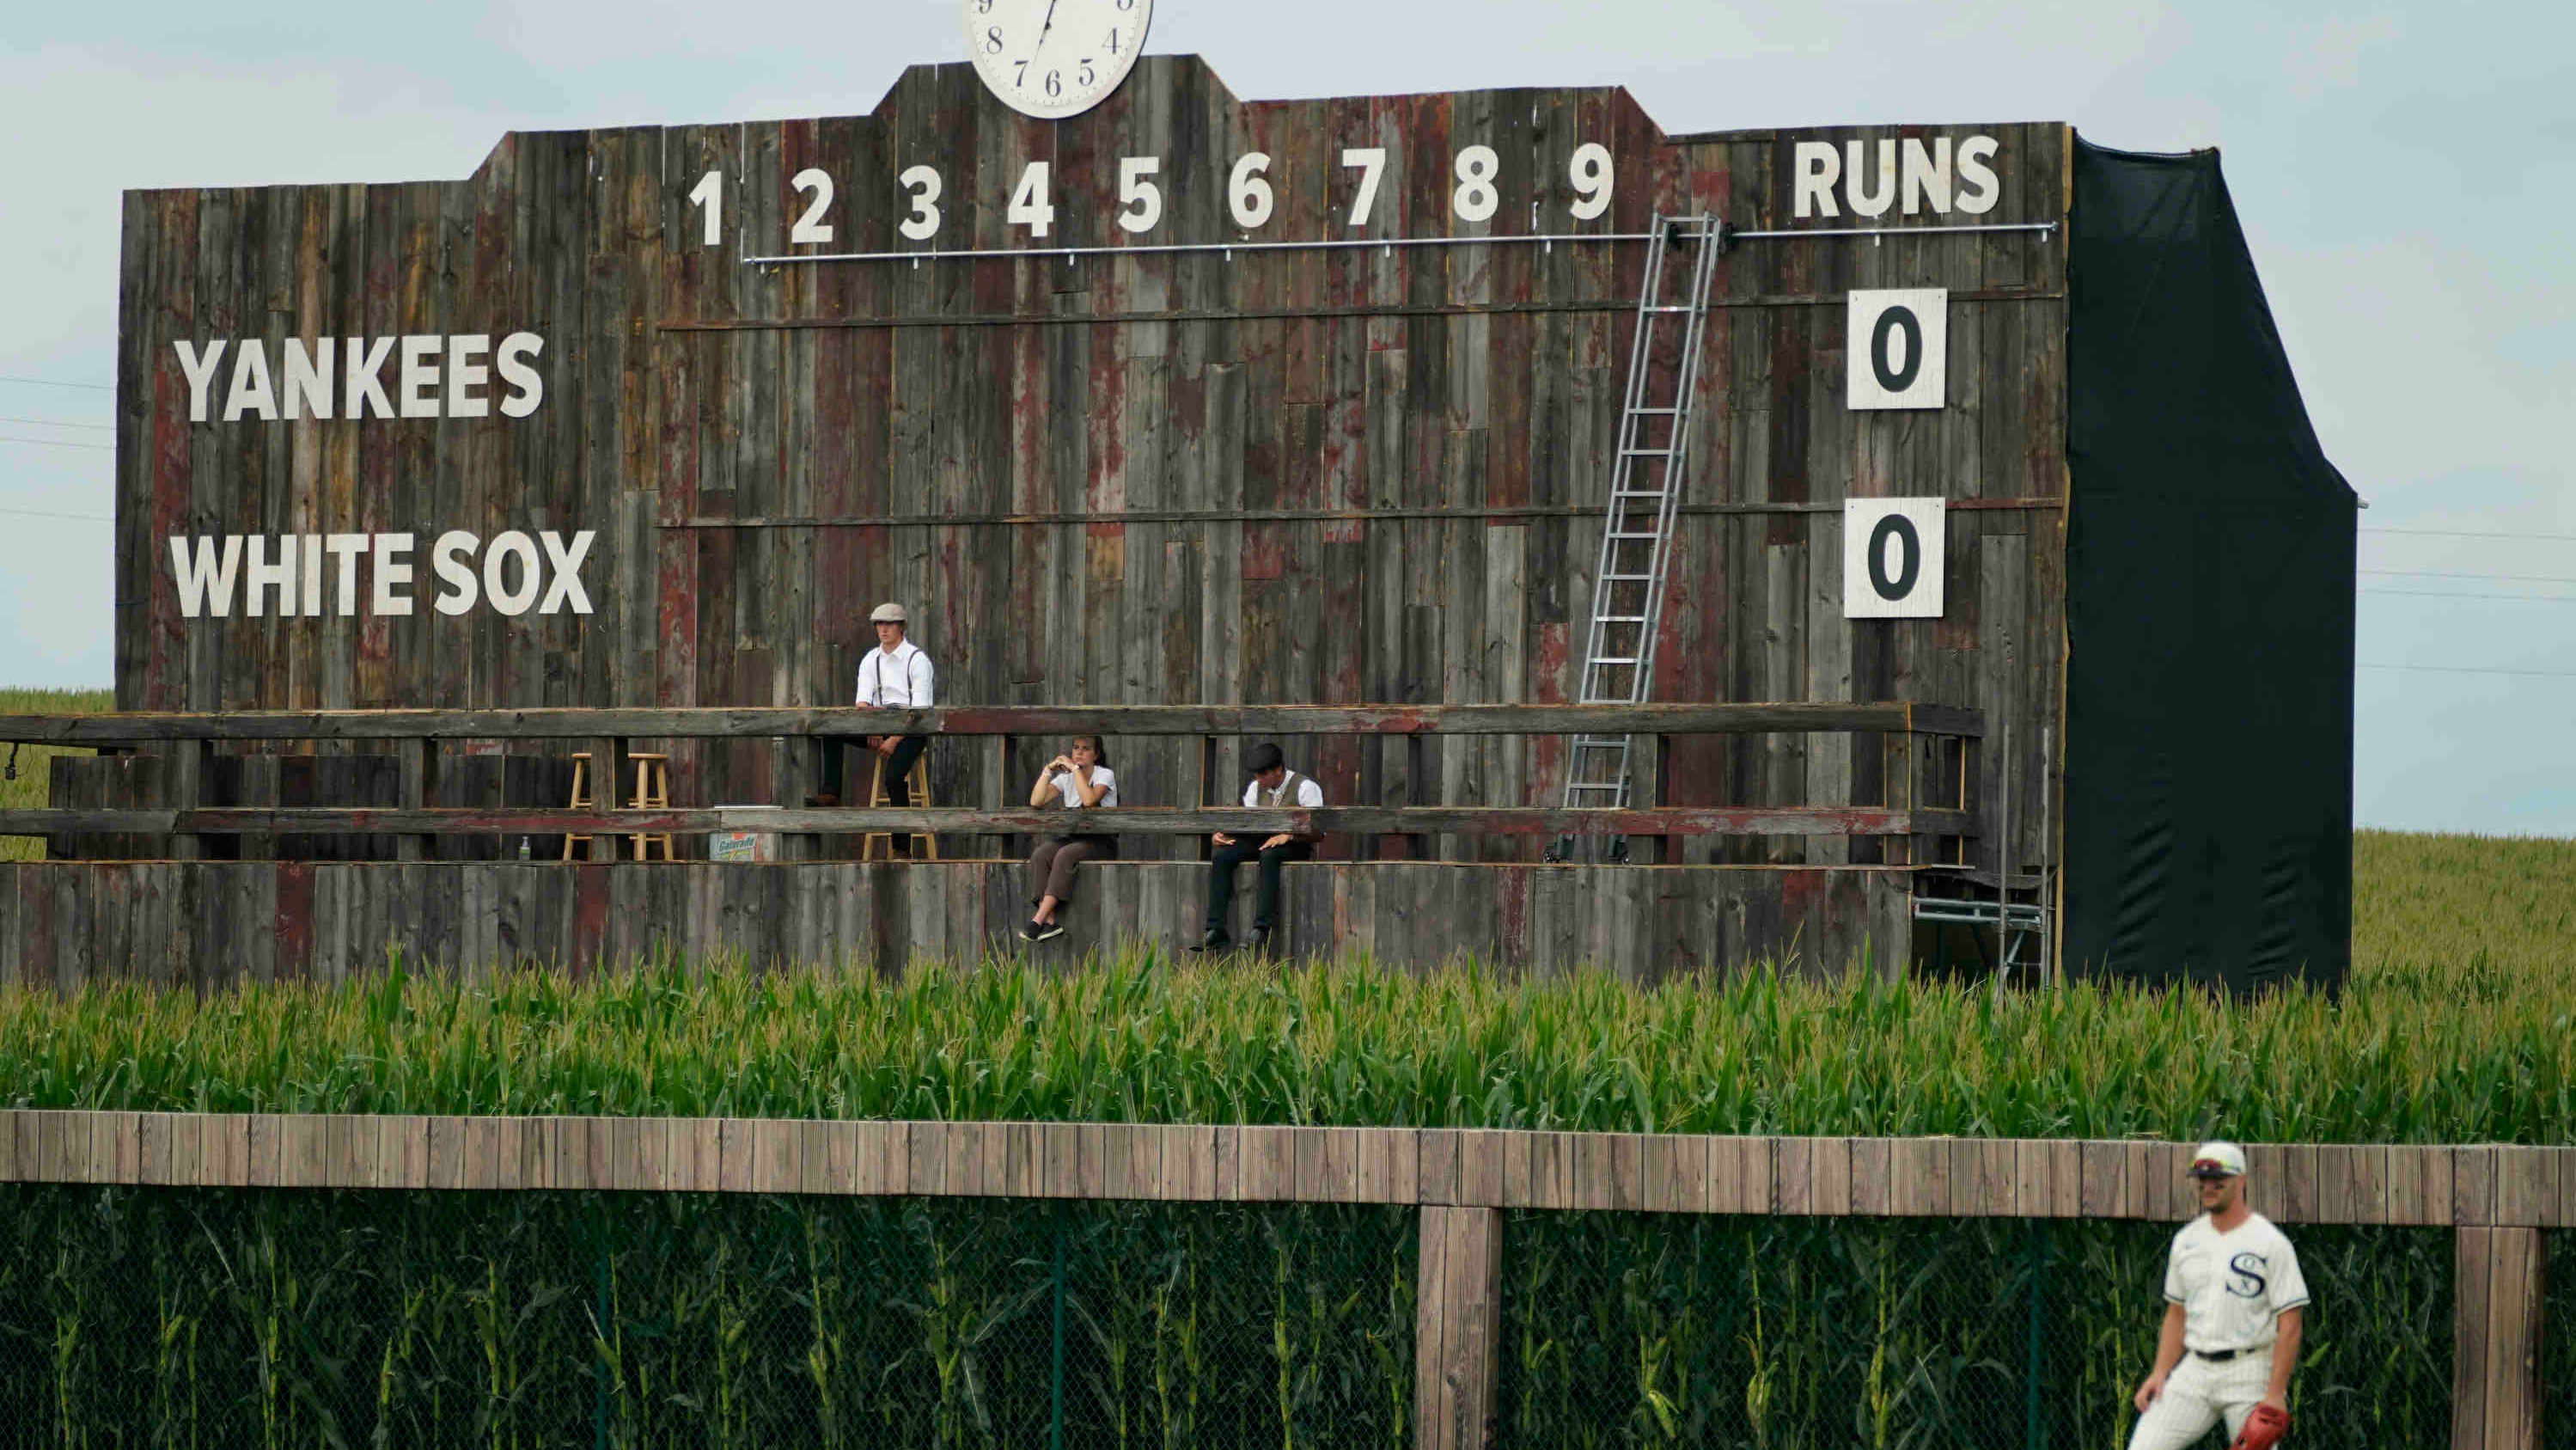 Tim Anderson Gives 'Field of Dreams' Game a Hollywood Ending - The